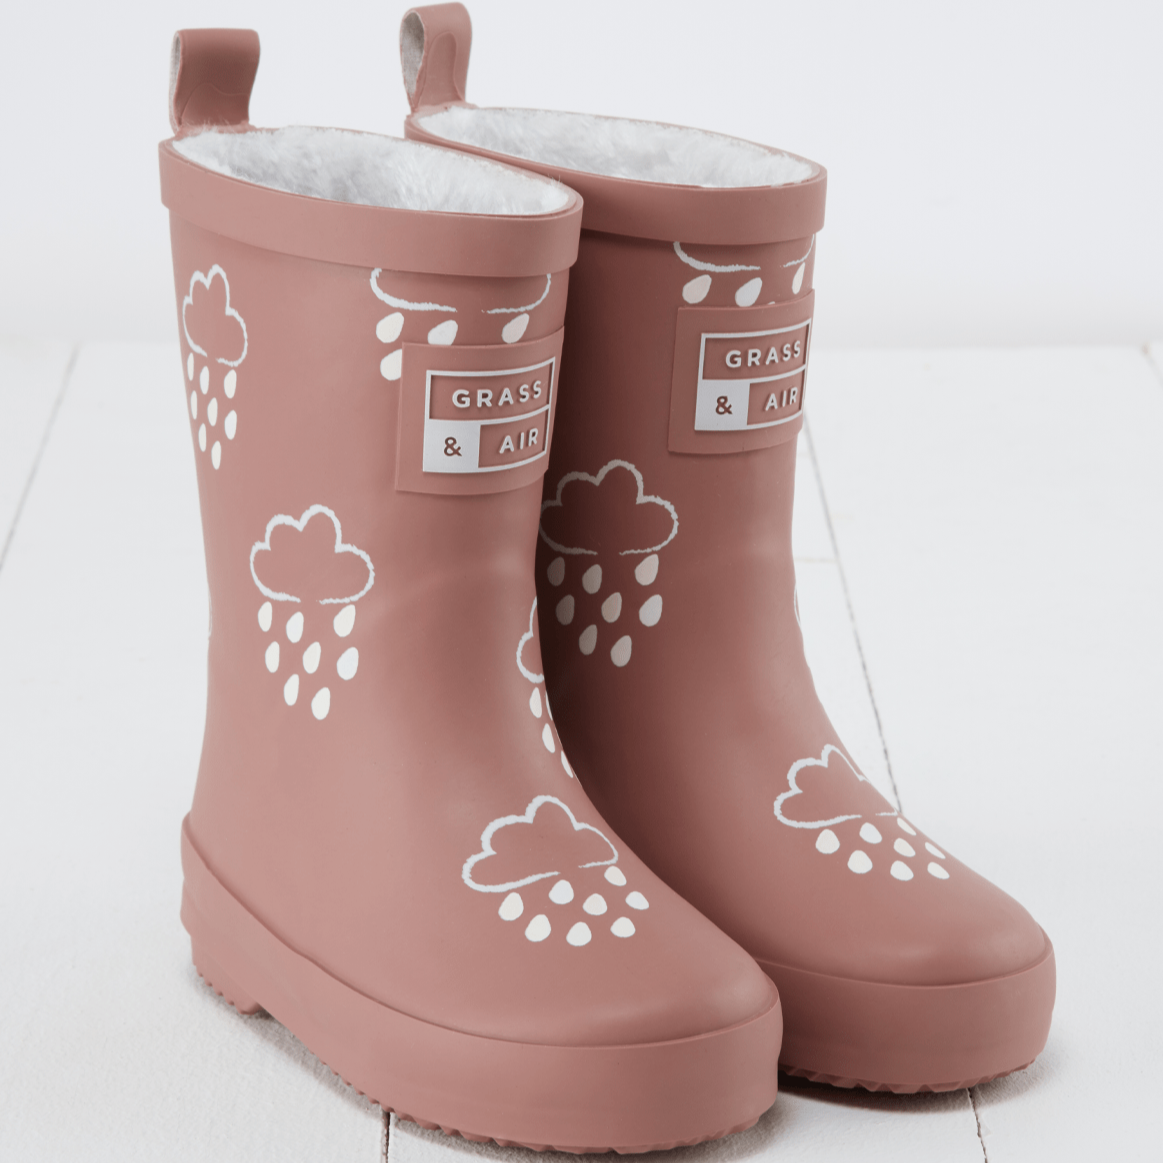 Grass & Air Wellie Boots Kids Colour Changing Wellies (Rose)